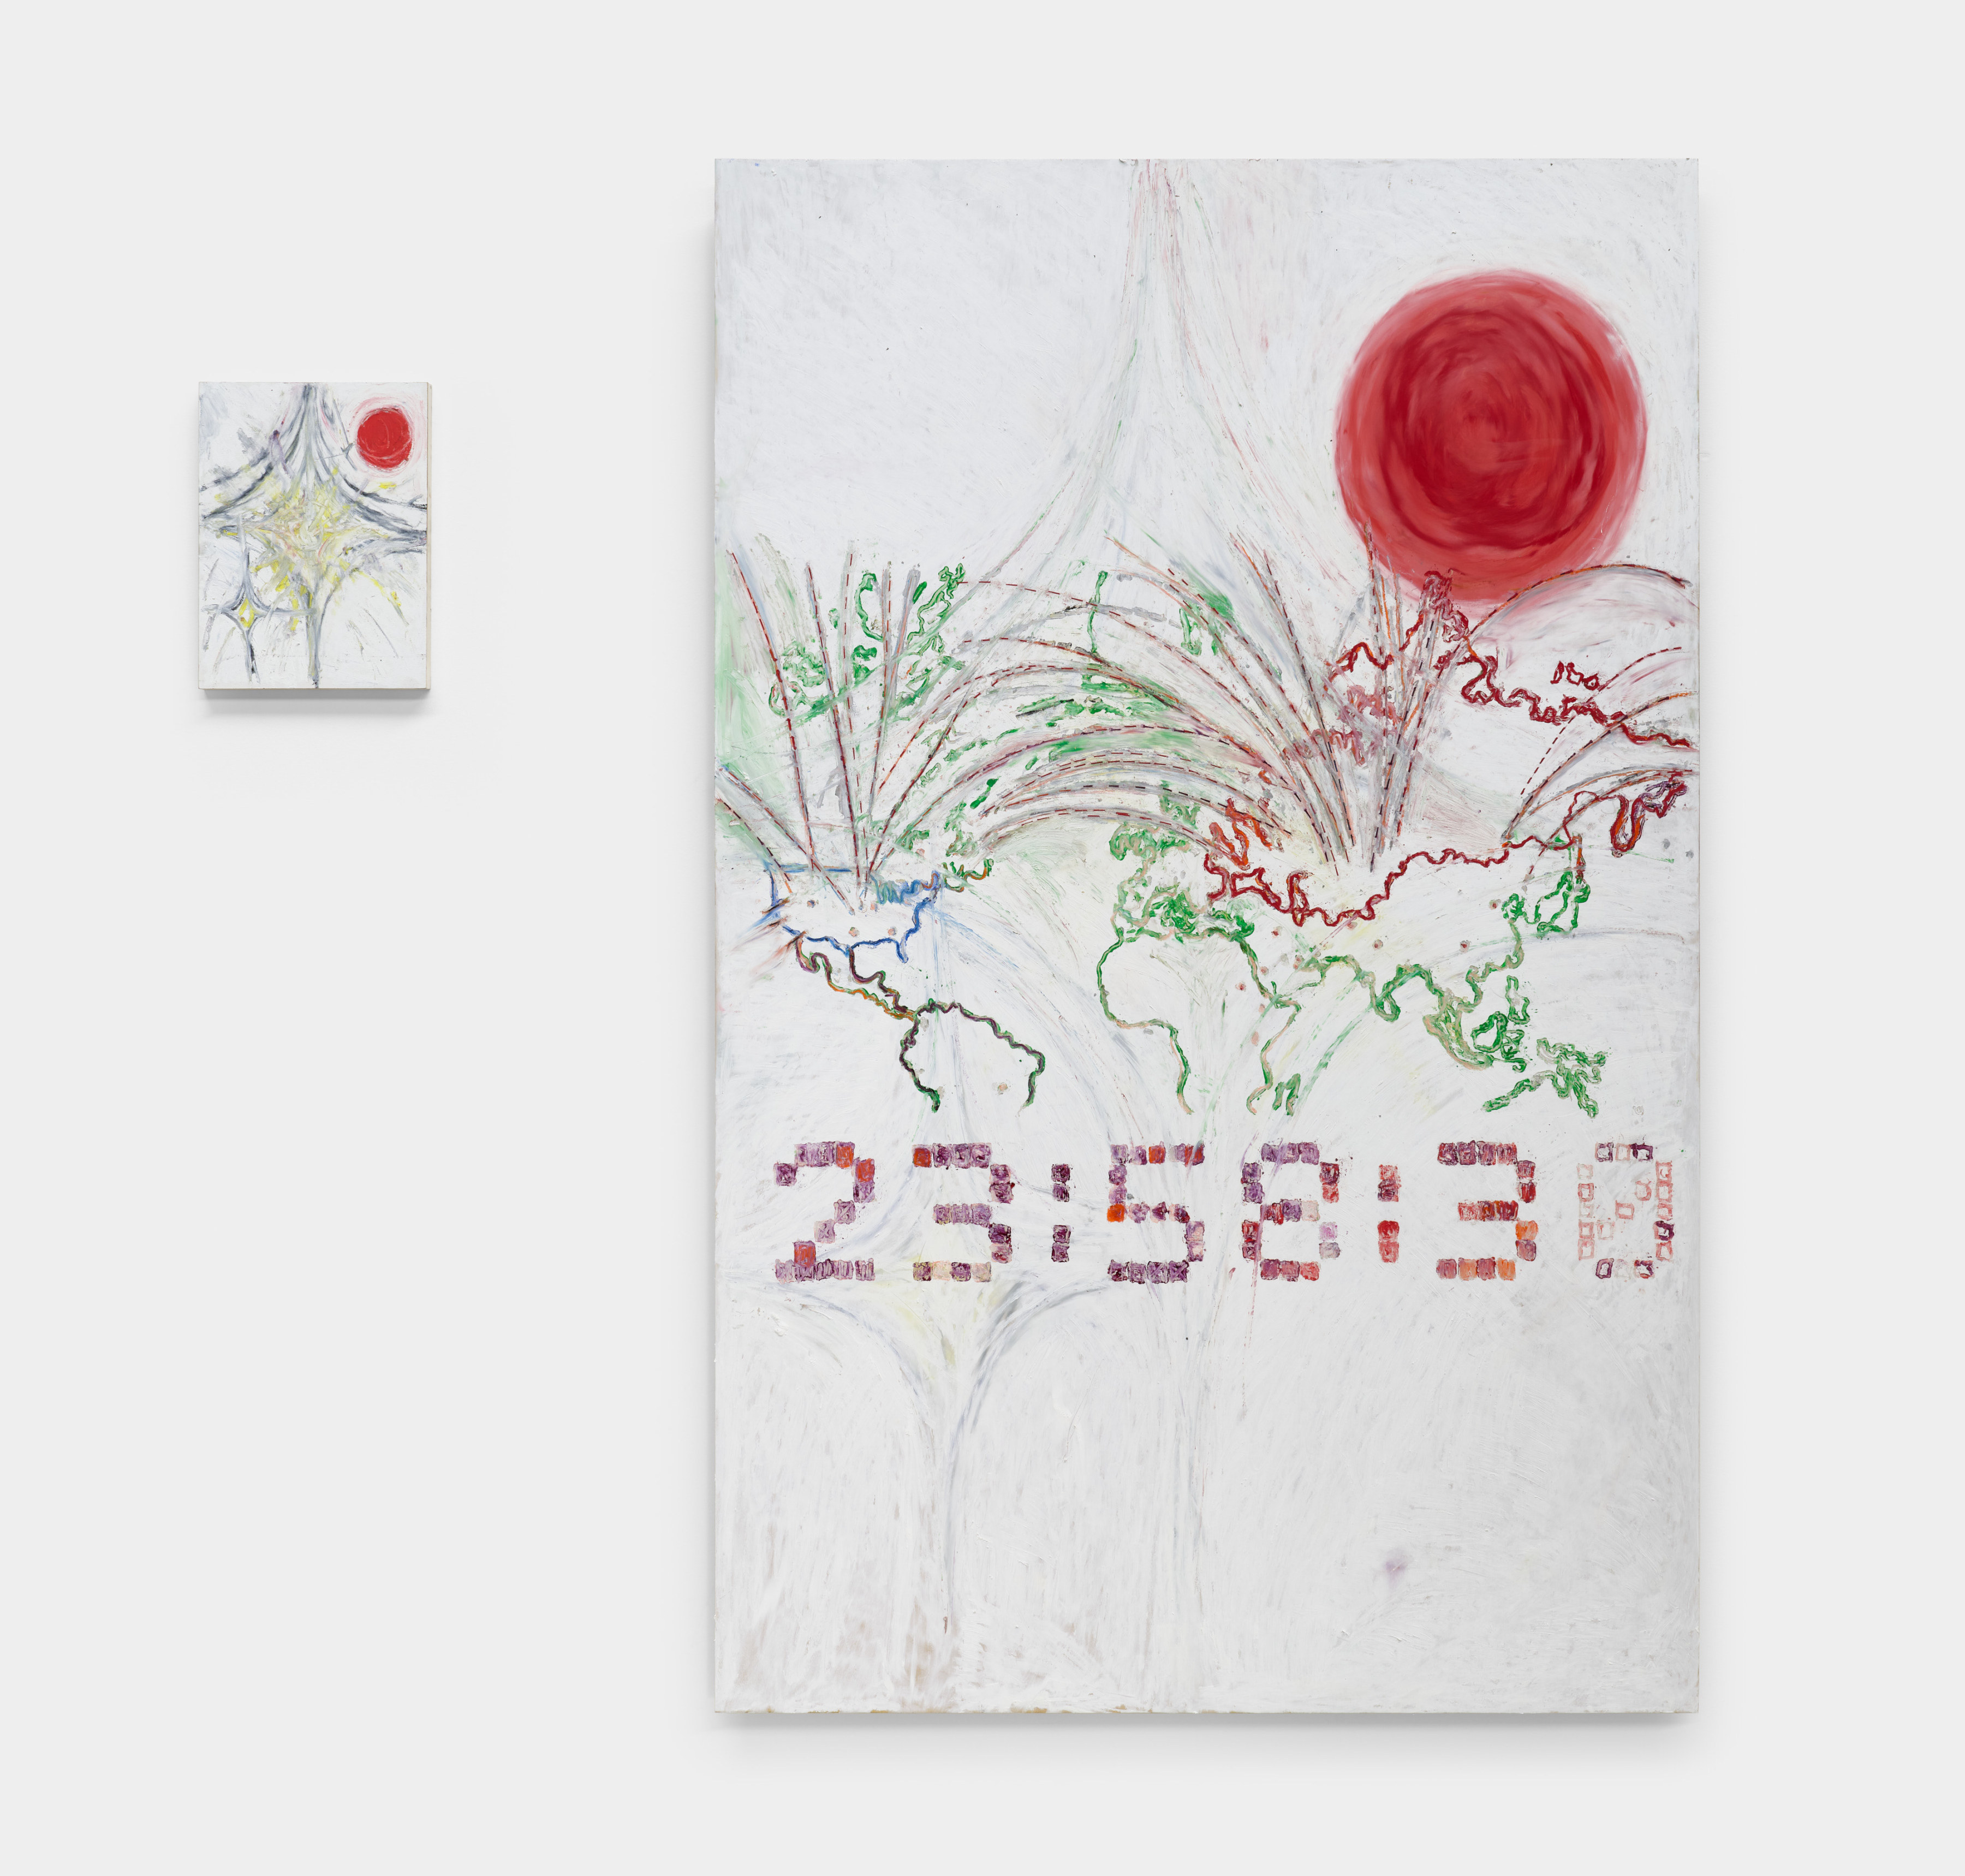 An oil stick on wood panel diptych. A small white panel on the left depicts two grey and yellow star like shapes beneath a red sun. A much larger white panel on the right depicts a map of the world with flight paths crossing between continents beneath a red sun and  large digital font clock reads "23:58:30" 